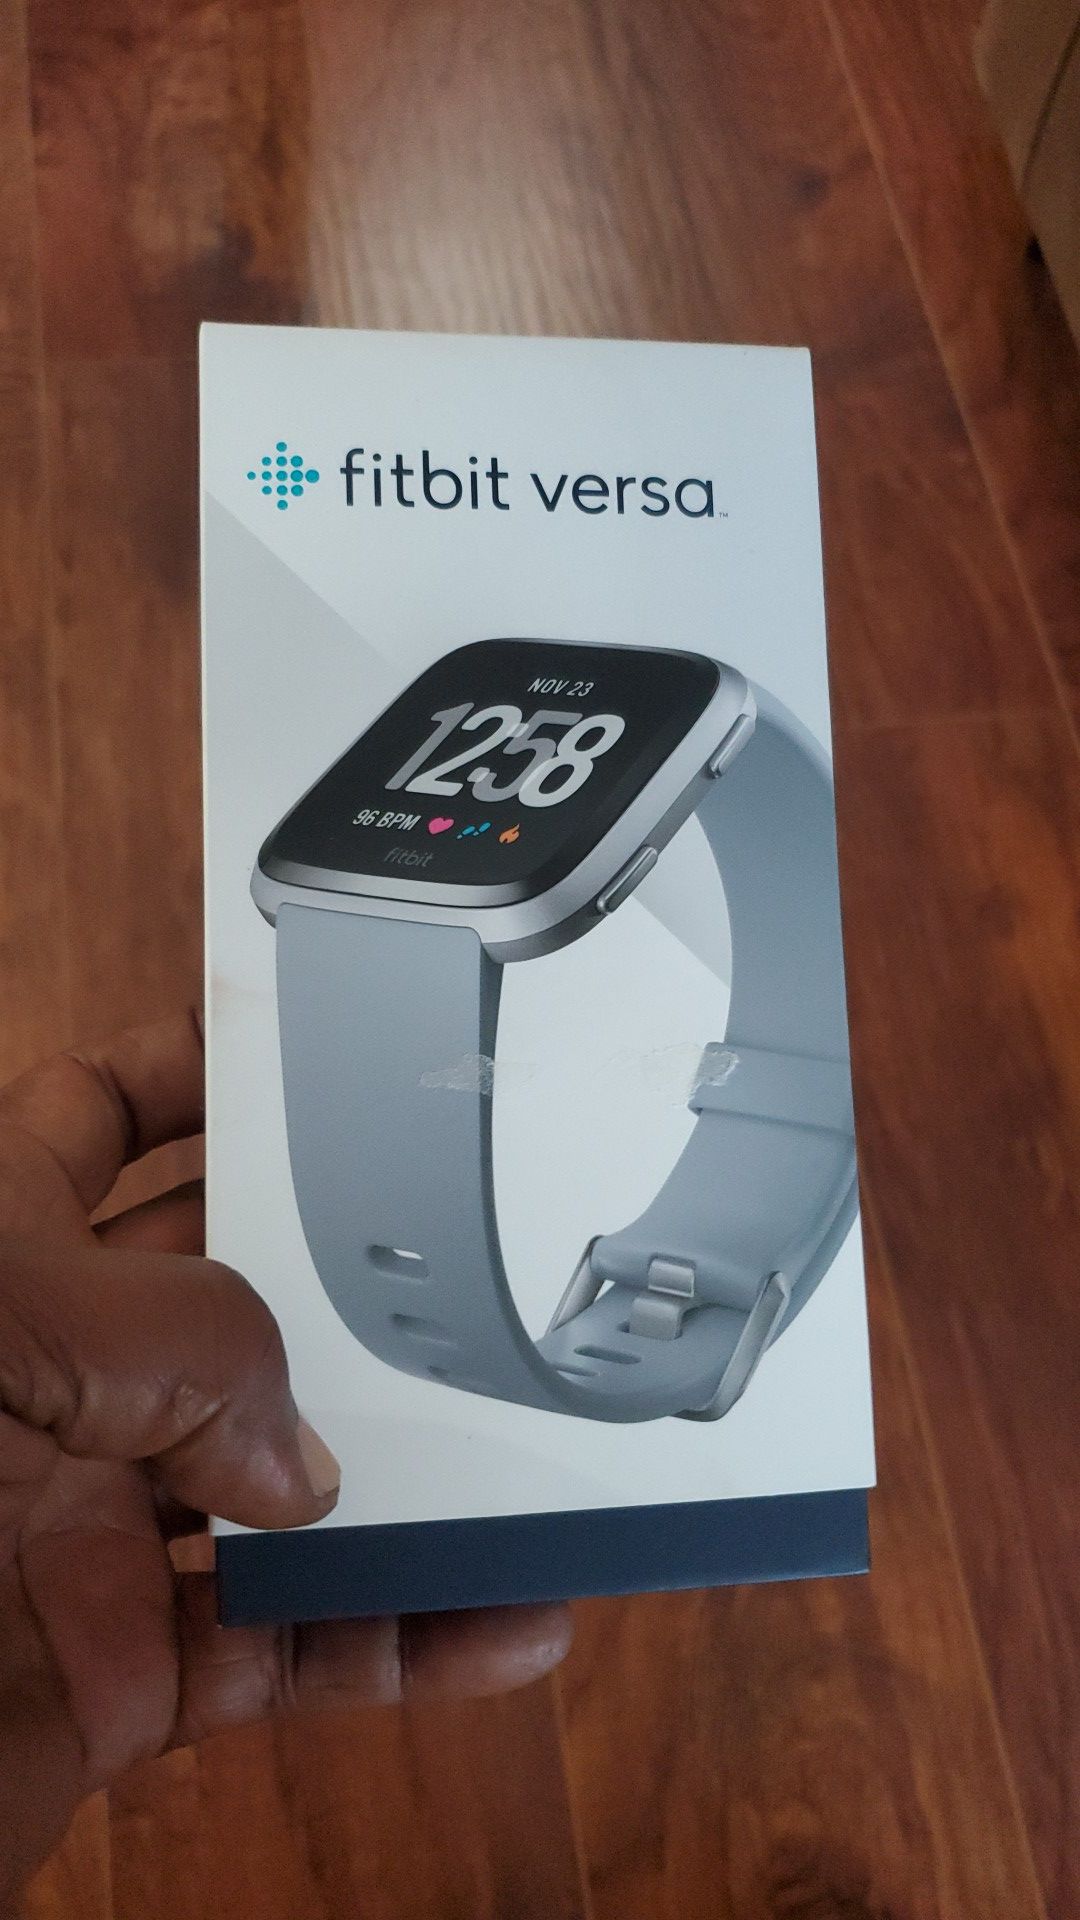 New still in Box! Fitbit Versa Smart Watch + Extra Fitbit Band